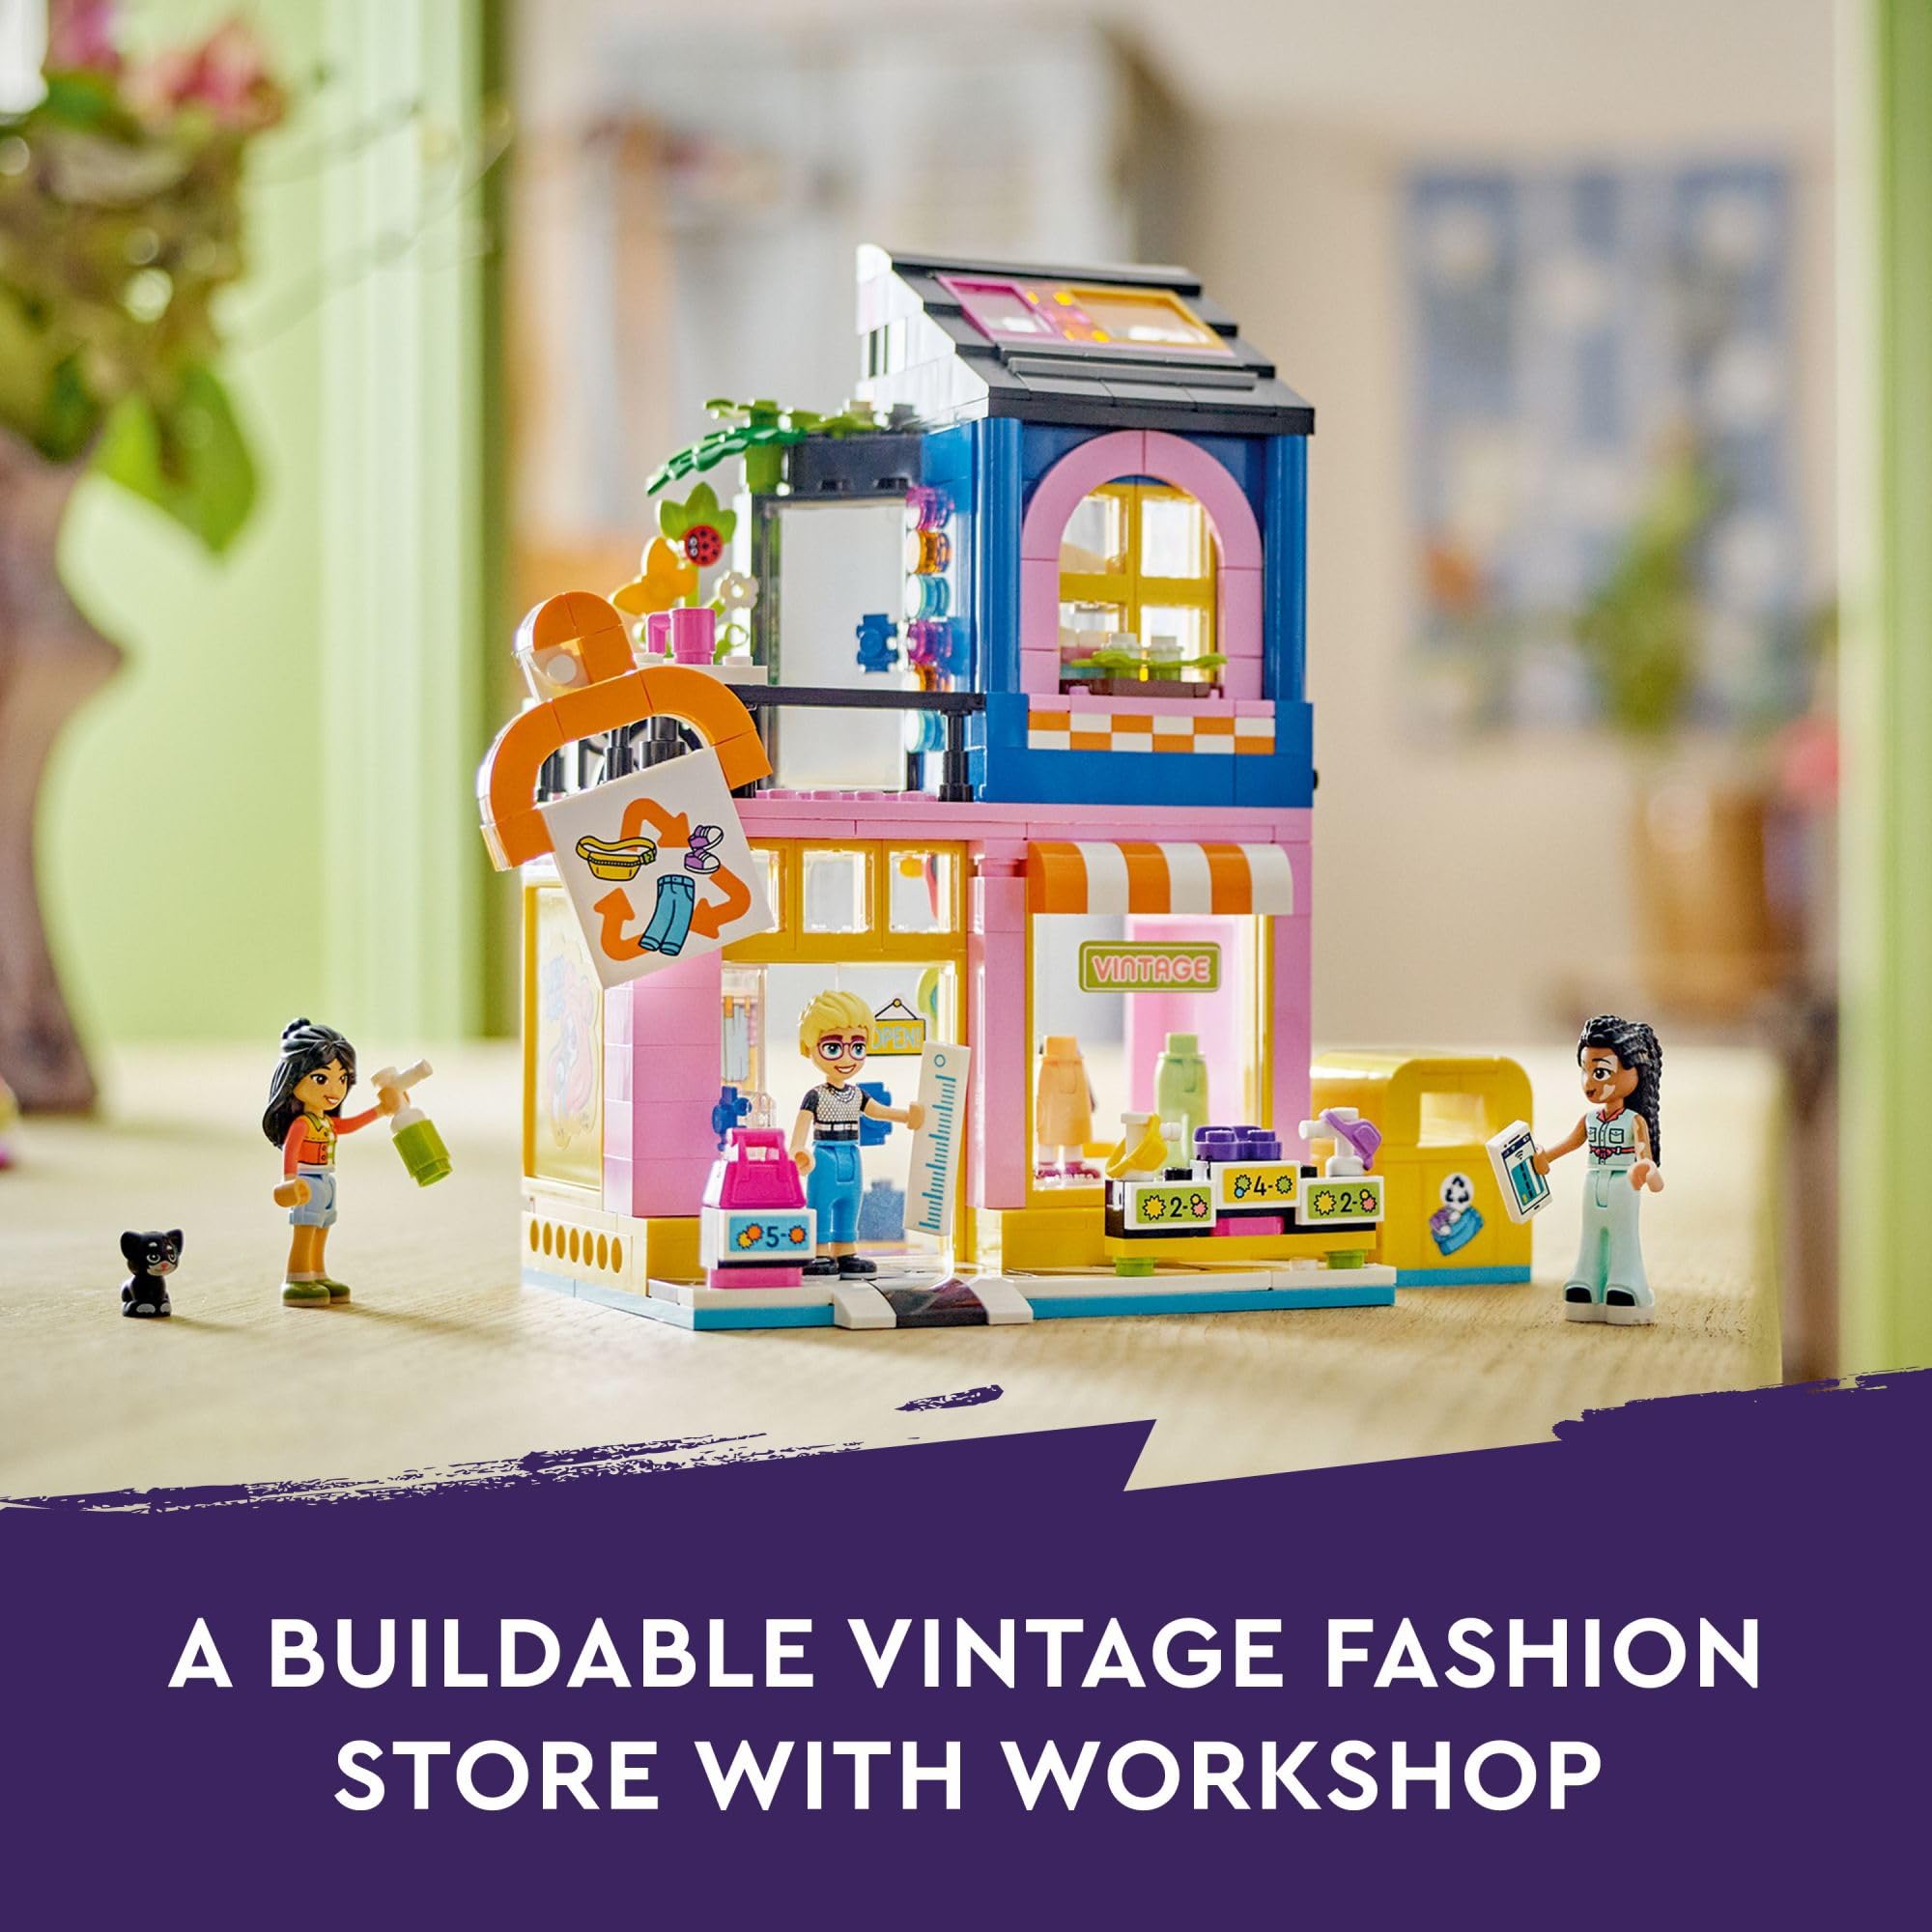 409-Piece LEGO Friends Vintage Fashion Store Toy (42614) $36 + Free Shipping